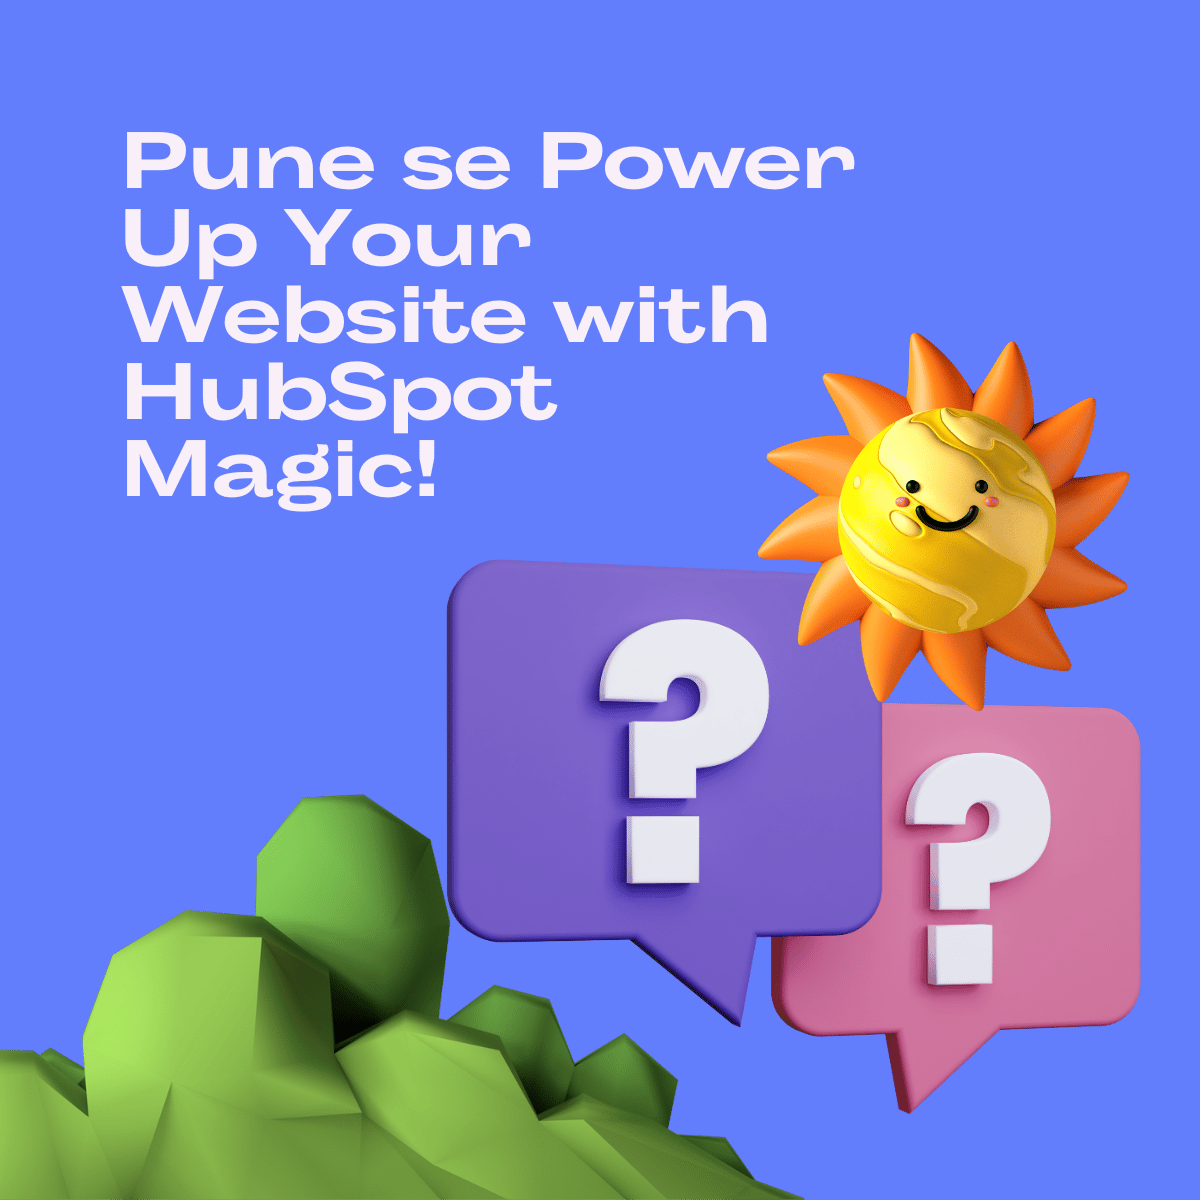 Pune se Power Up Your Website with HubSpot Magic!